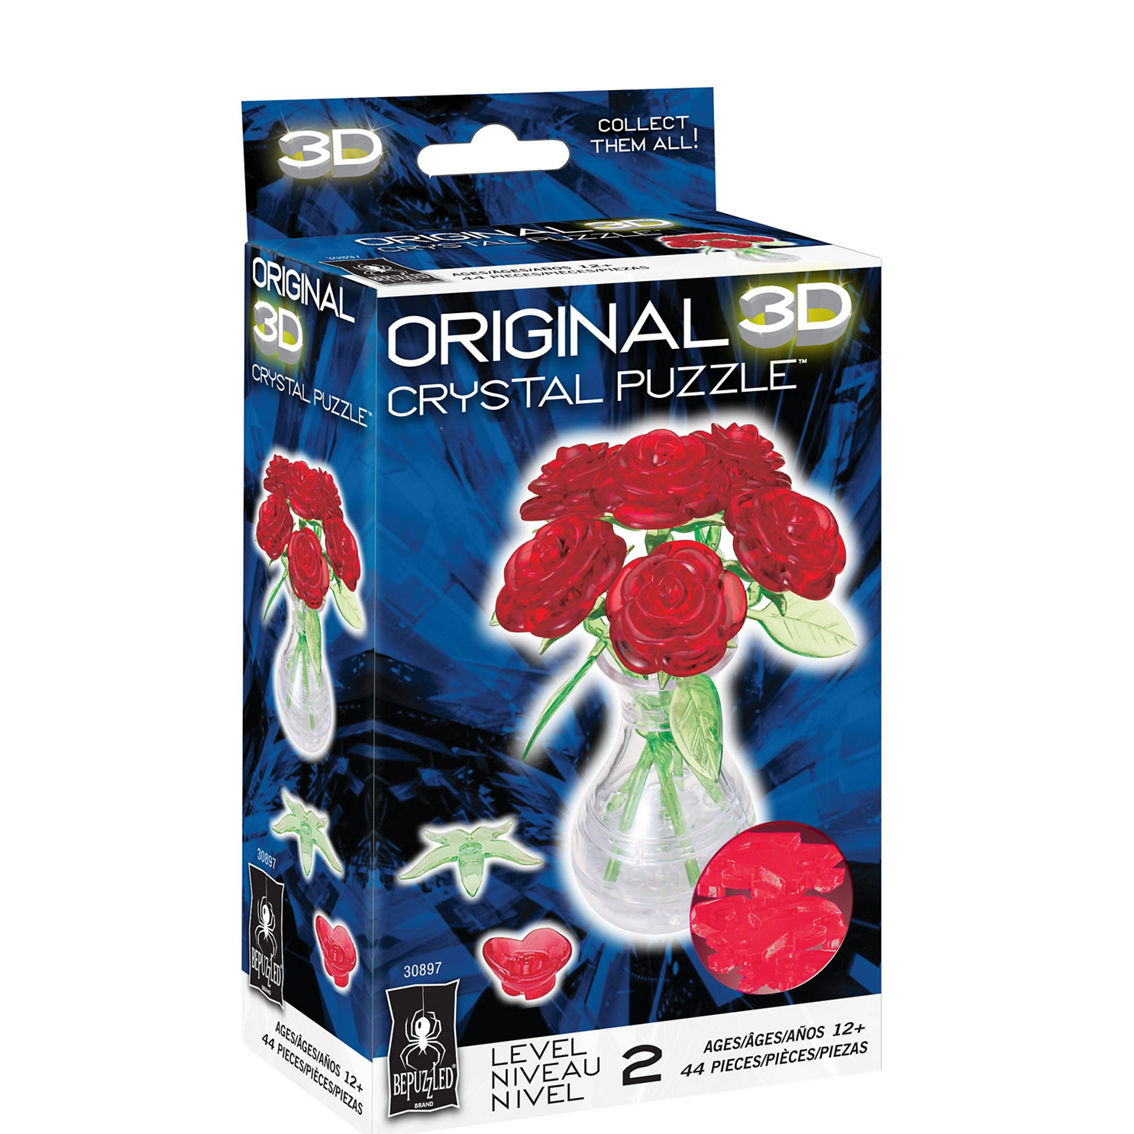 BePuzzled 3D Crystal Puzzle - Roses in a Vase: 44 Pcs - Image 2 of 2